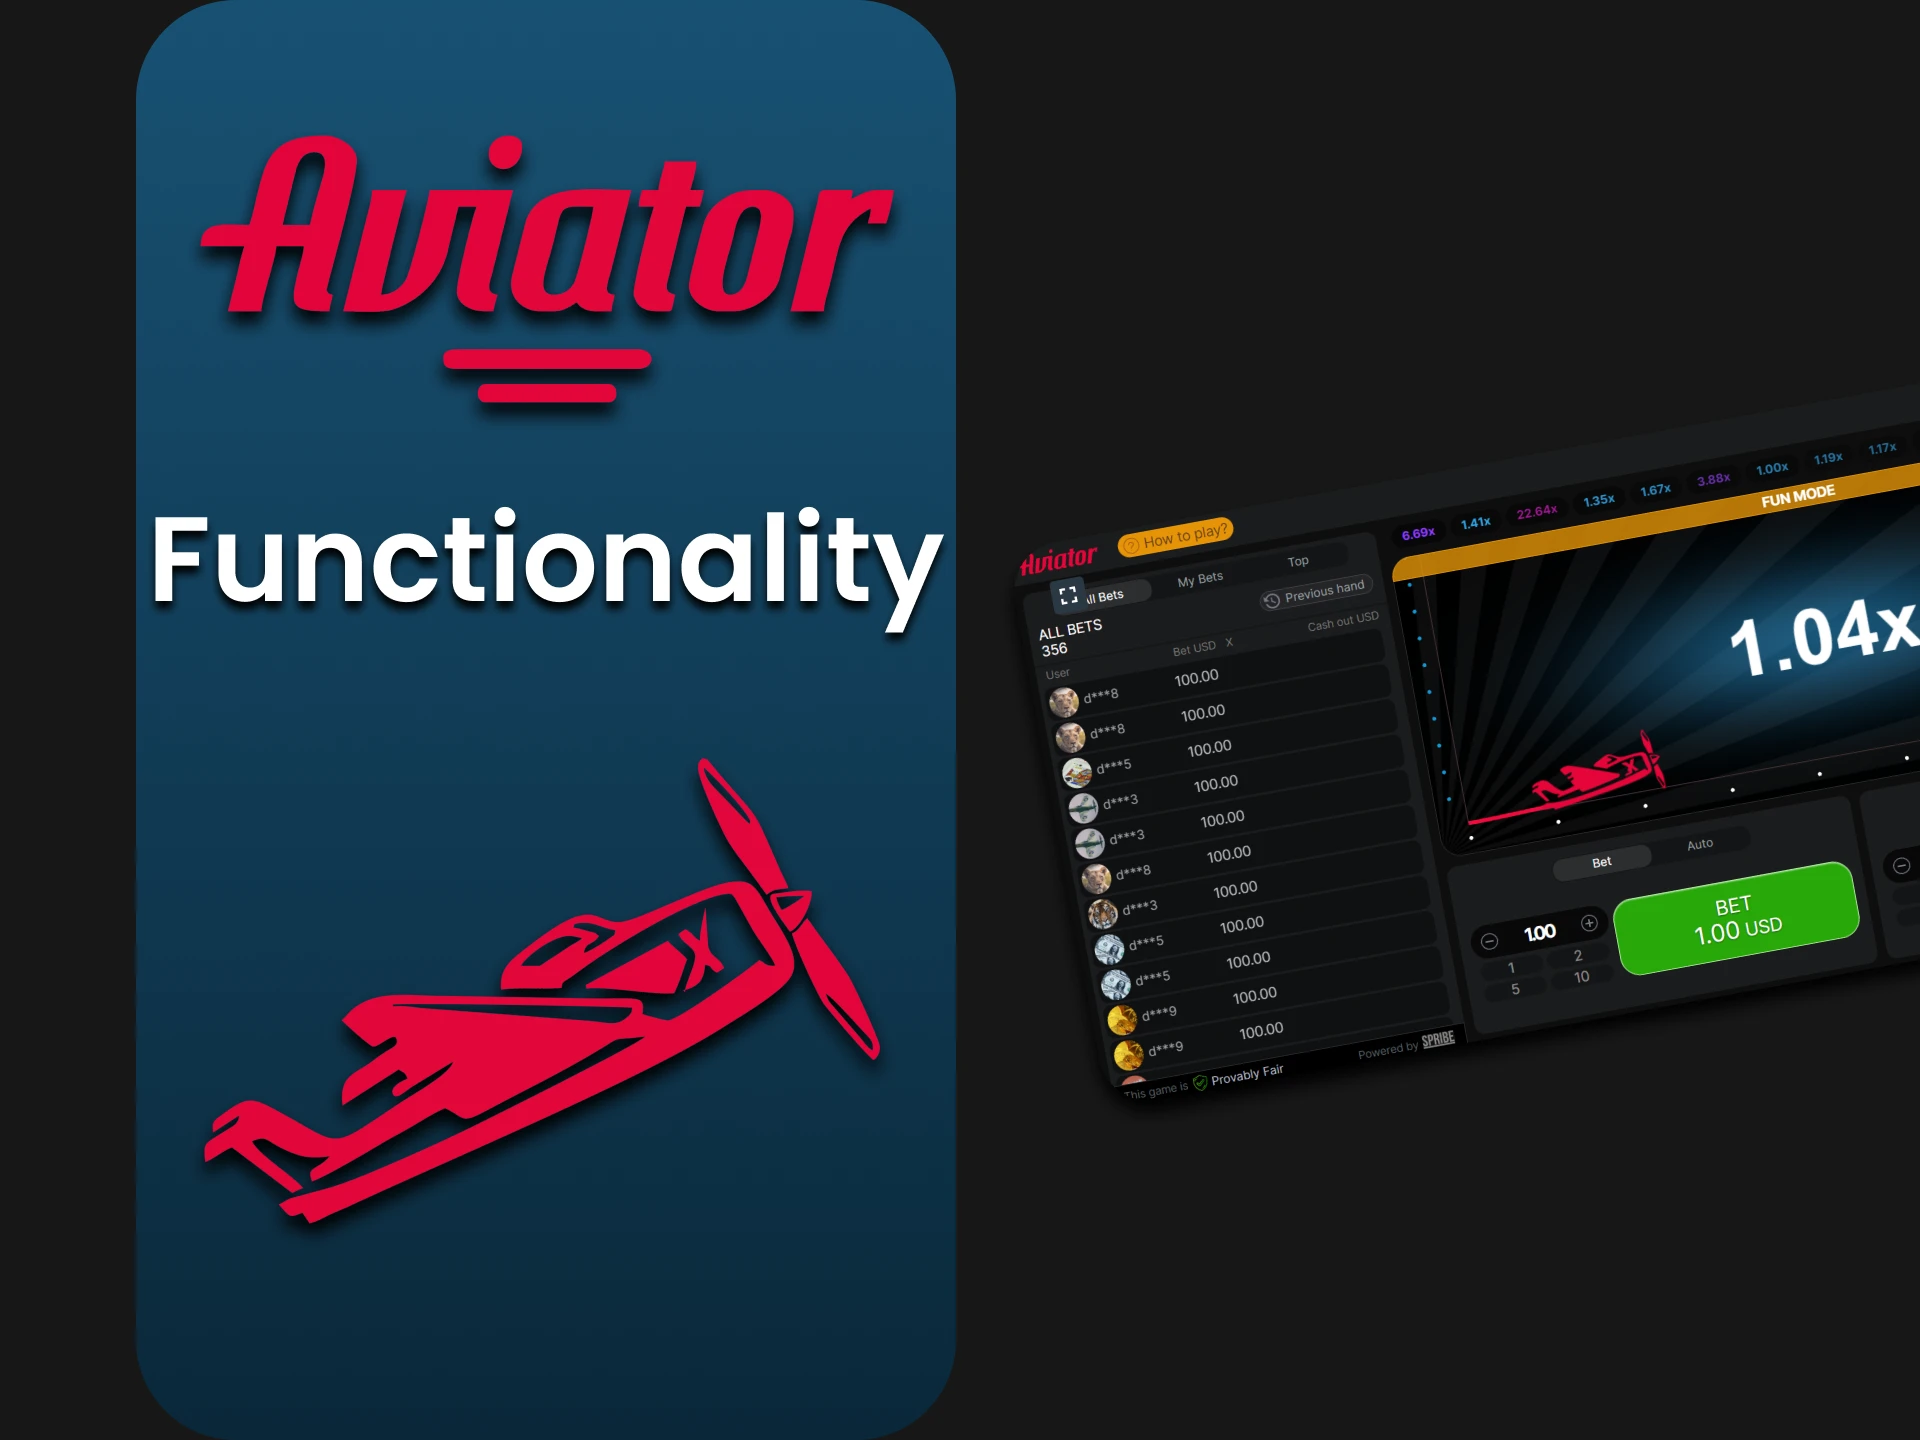 Study the functionality of the Aviator game before starting the game.